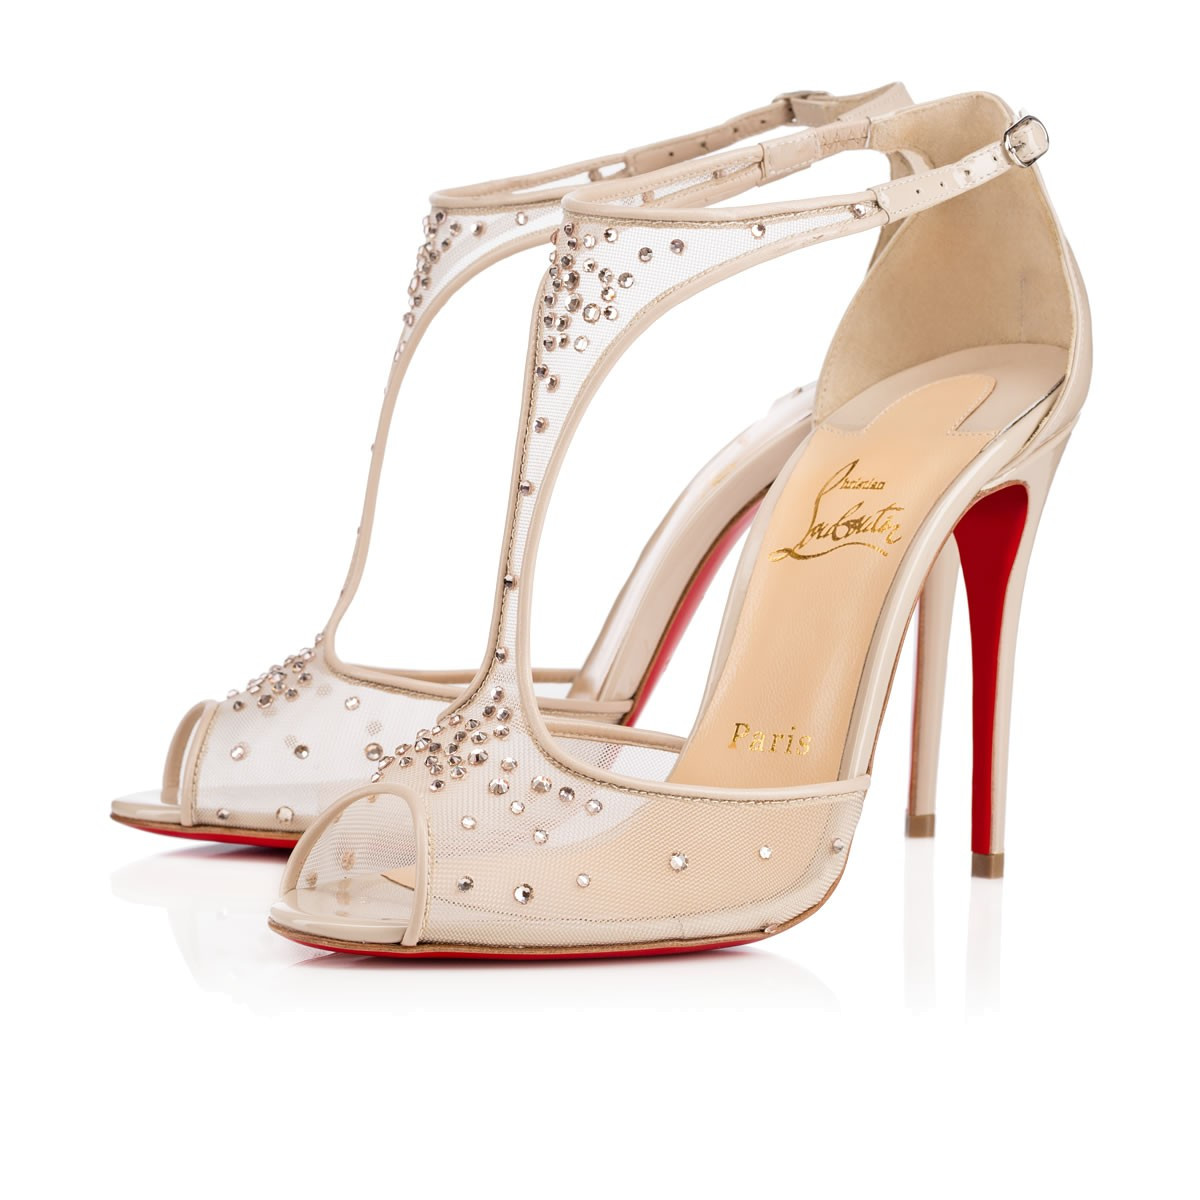 Wedding Shoes Louboutin
 20 Aisle Perfect Wedding Shoes fit for a Queen Aisle Perfect